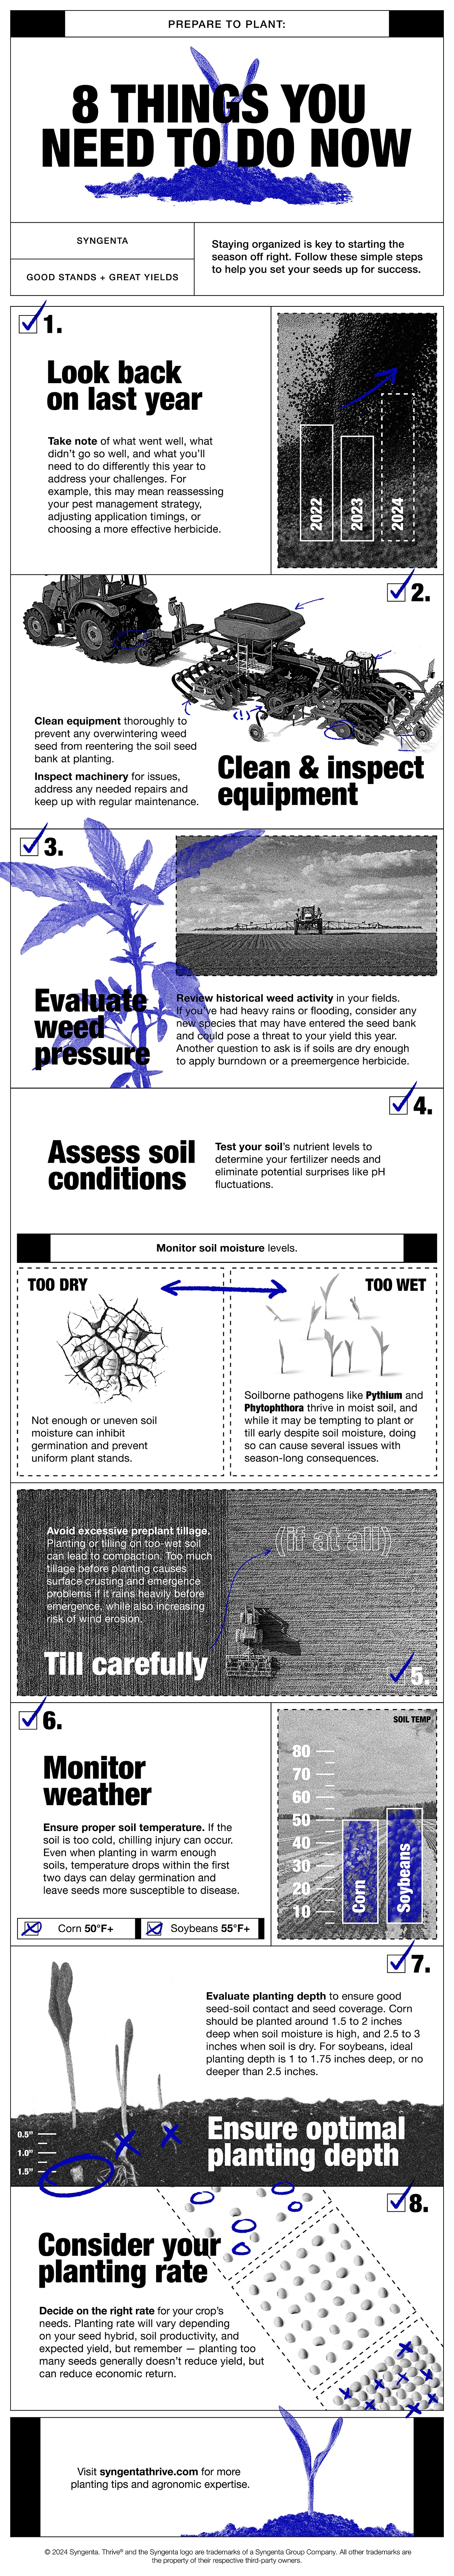 An infographic with illustrations of corn seedlings, common weeds, and informative image examples with tips for planting tips to prepare to plant throughout. 